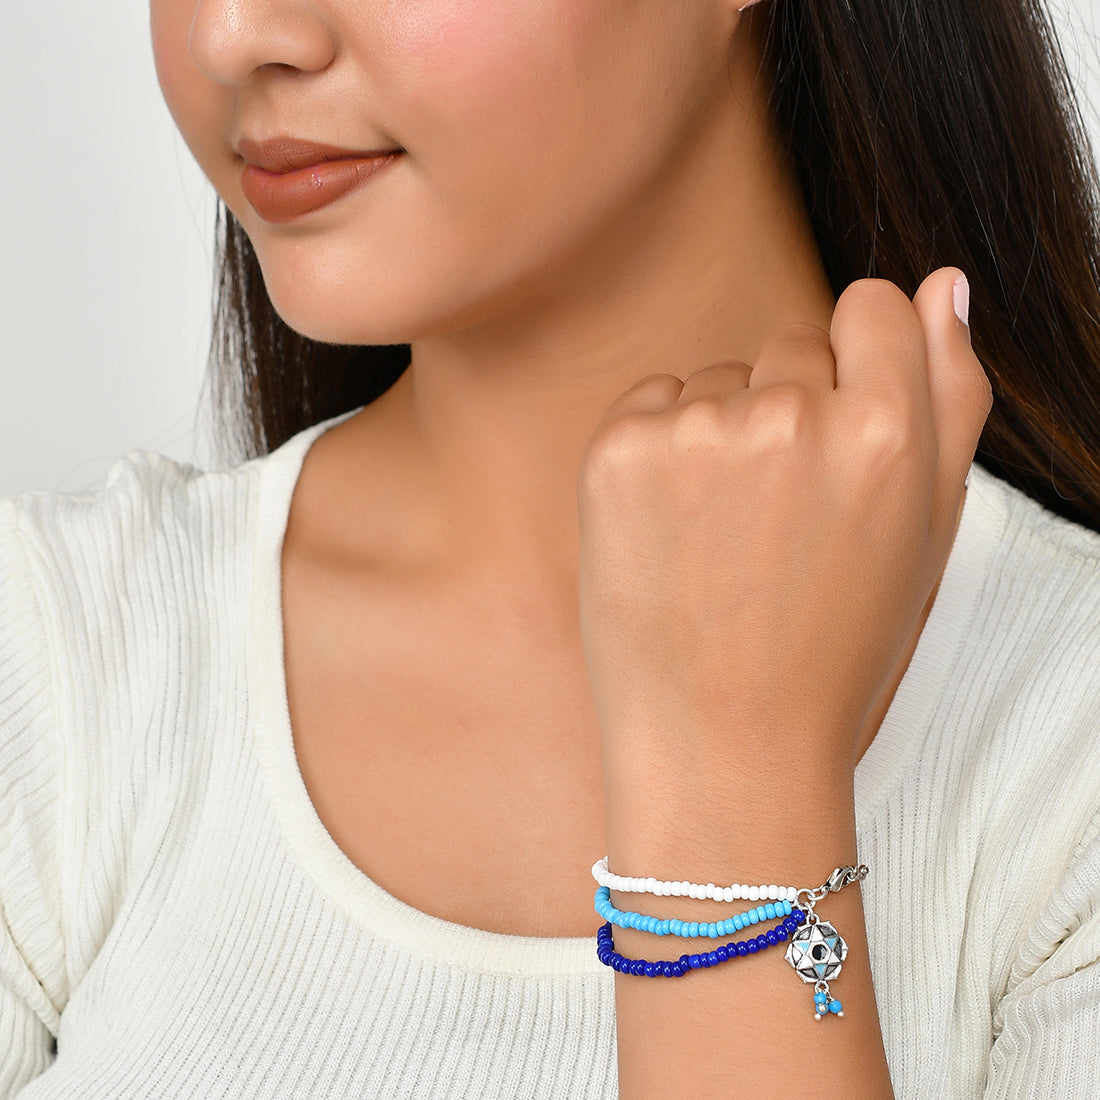 Buy Crescent Moon Star Bracelet in 925 Sterling Silver and 4mm Paracord  Online - AYA'S